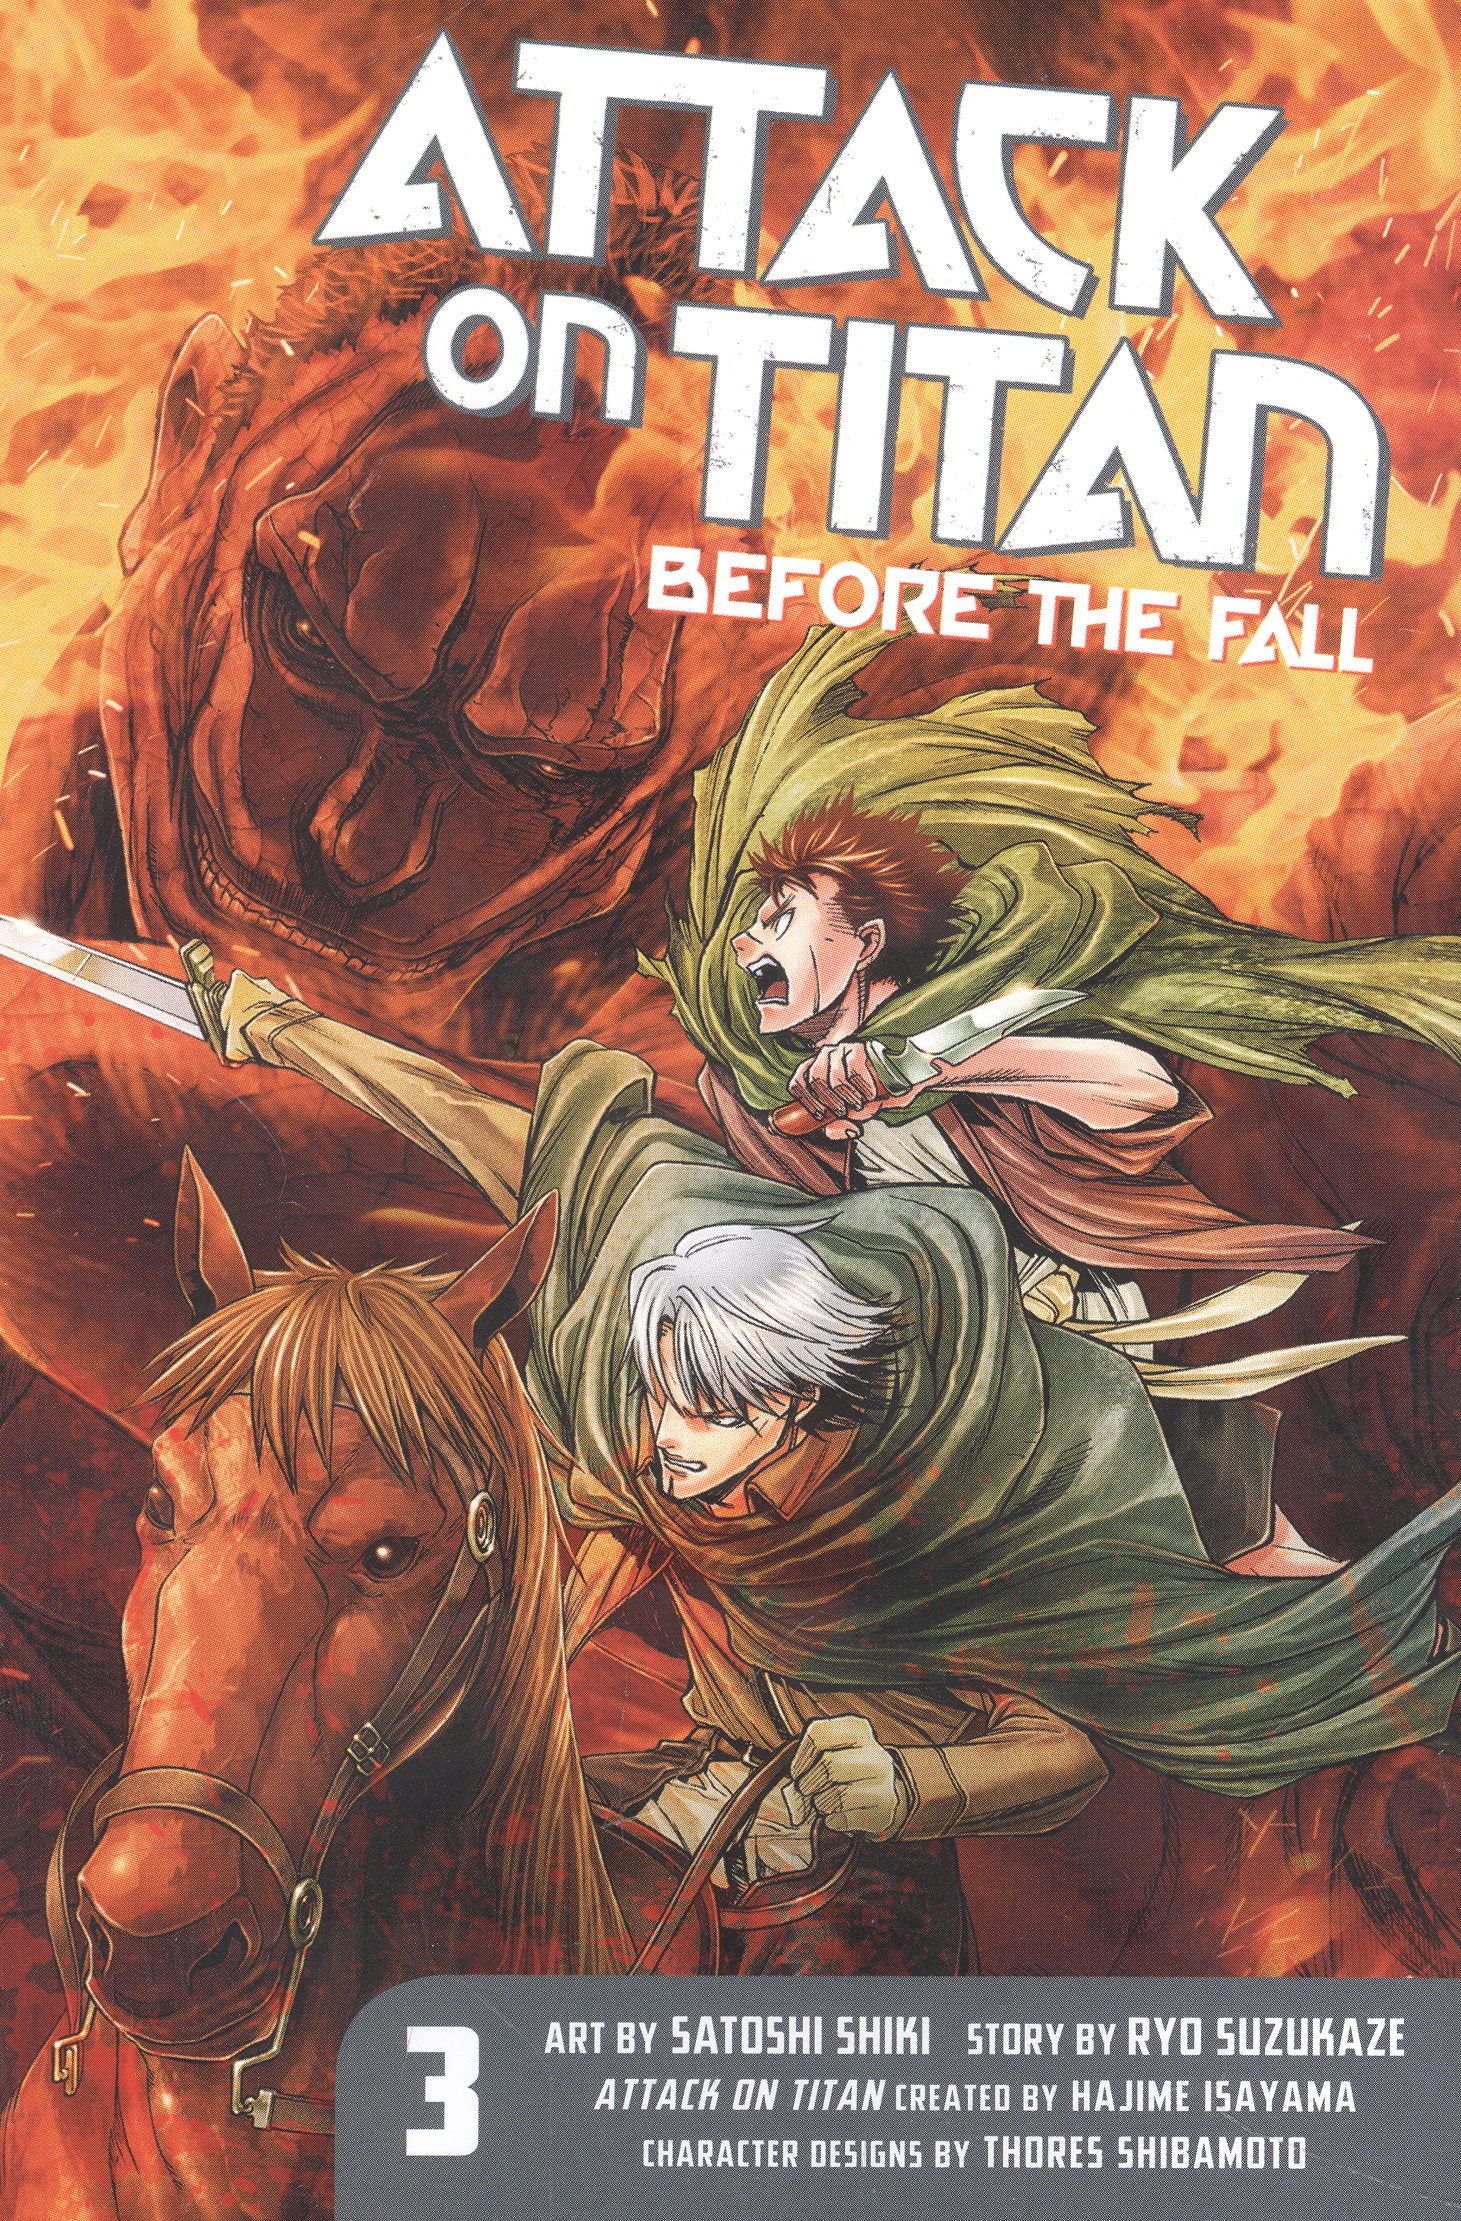 isayama h attack on titan before the fall 3 Isayama Hajime Attack on Titan: Before the Fall 3